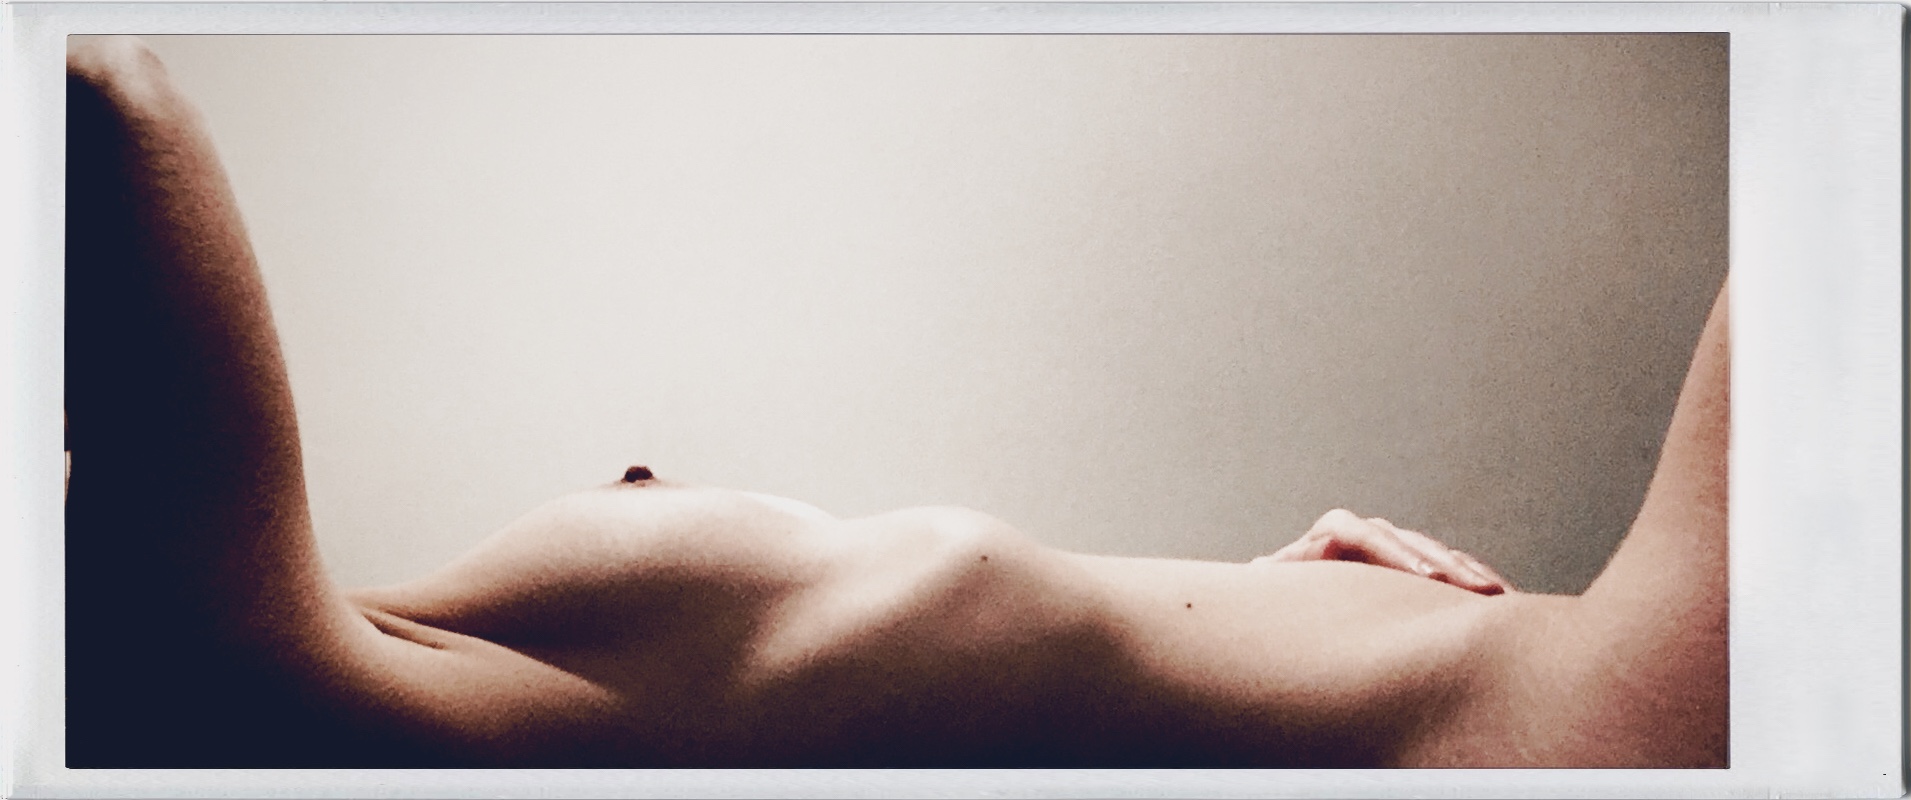 Altered behaviour - an image of me lying naked on a bed, seen from the side